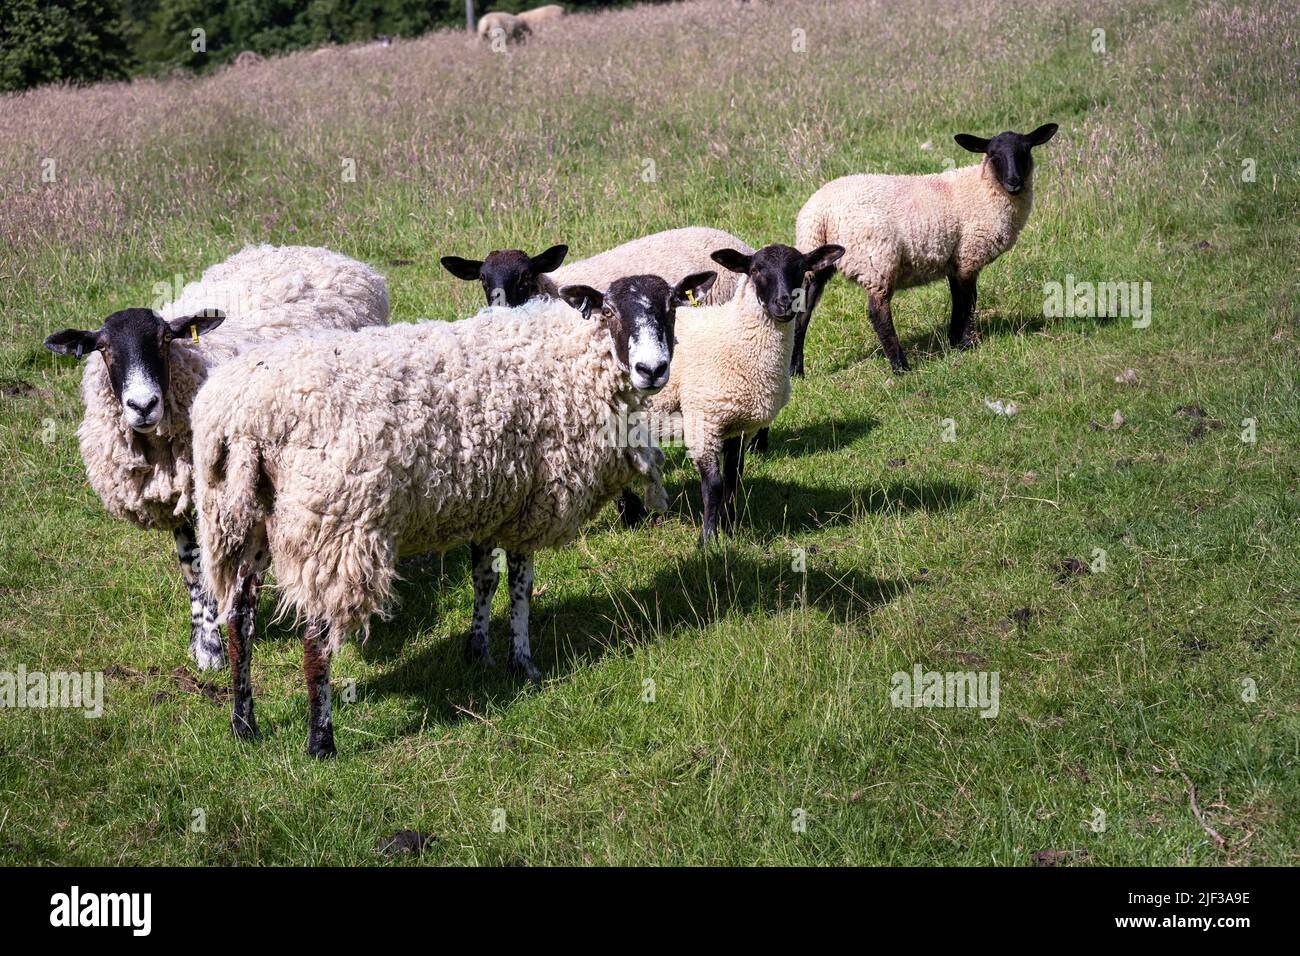 Shaggy sheep in a field in summer Stock Photo